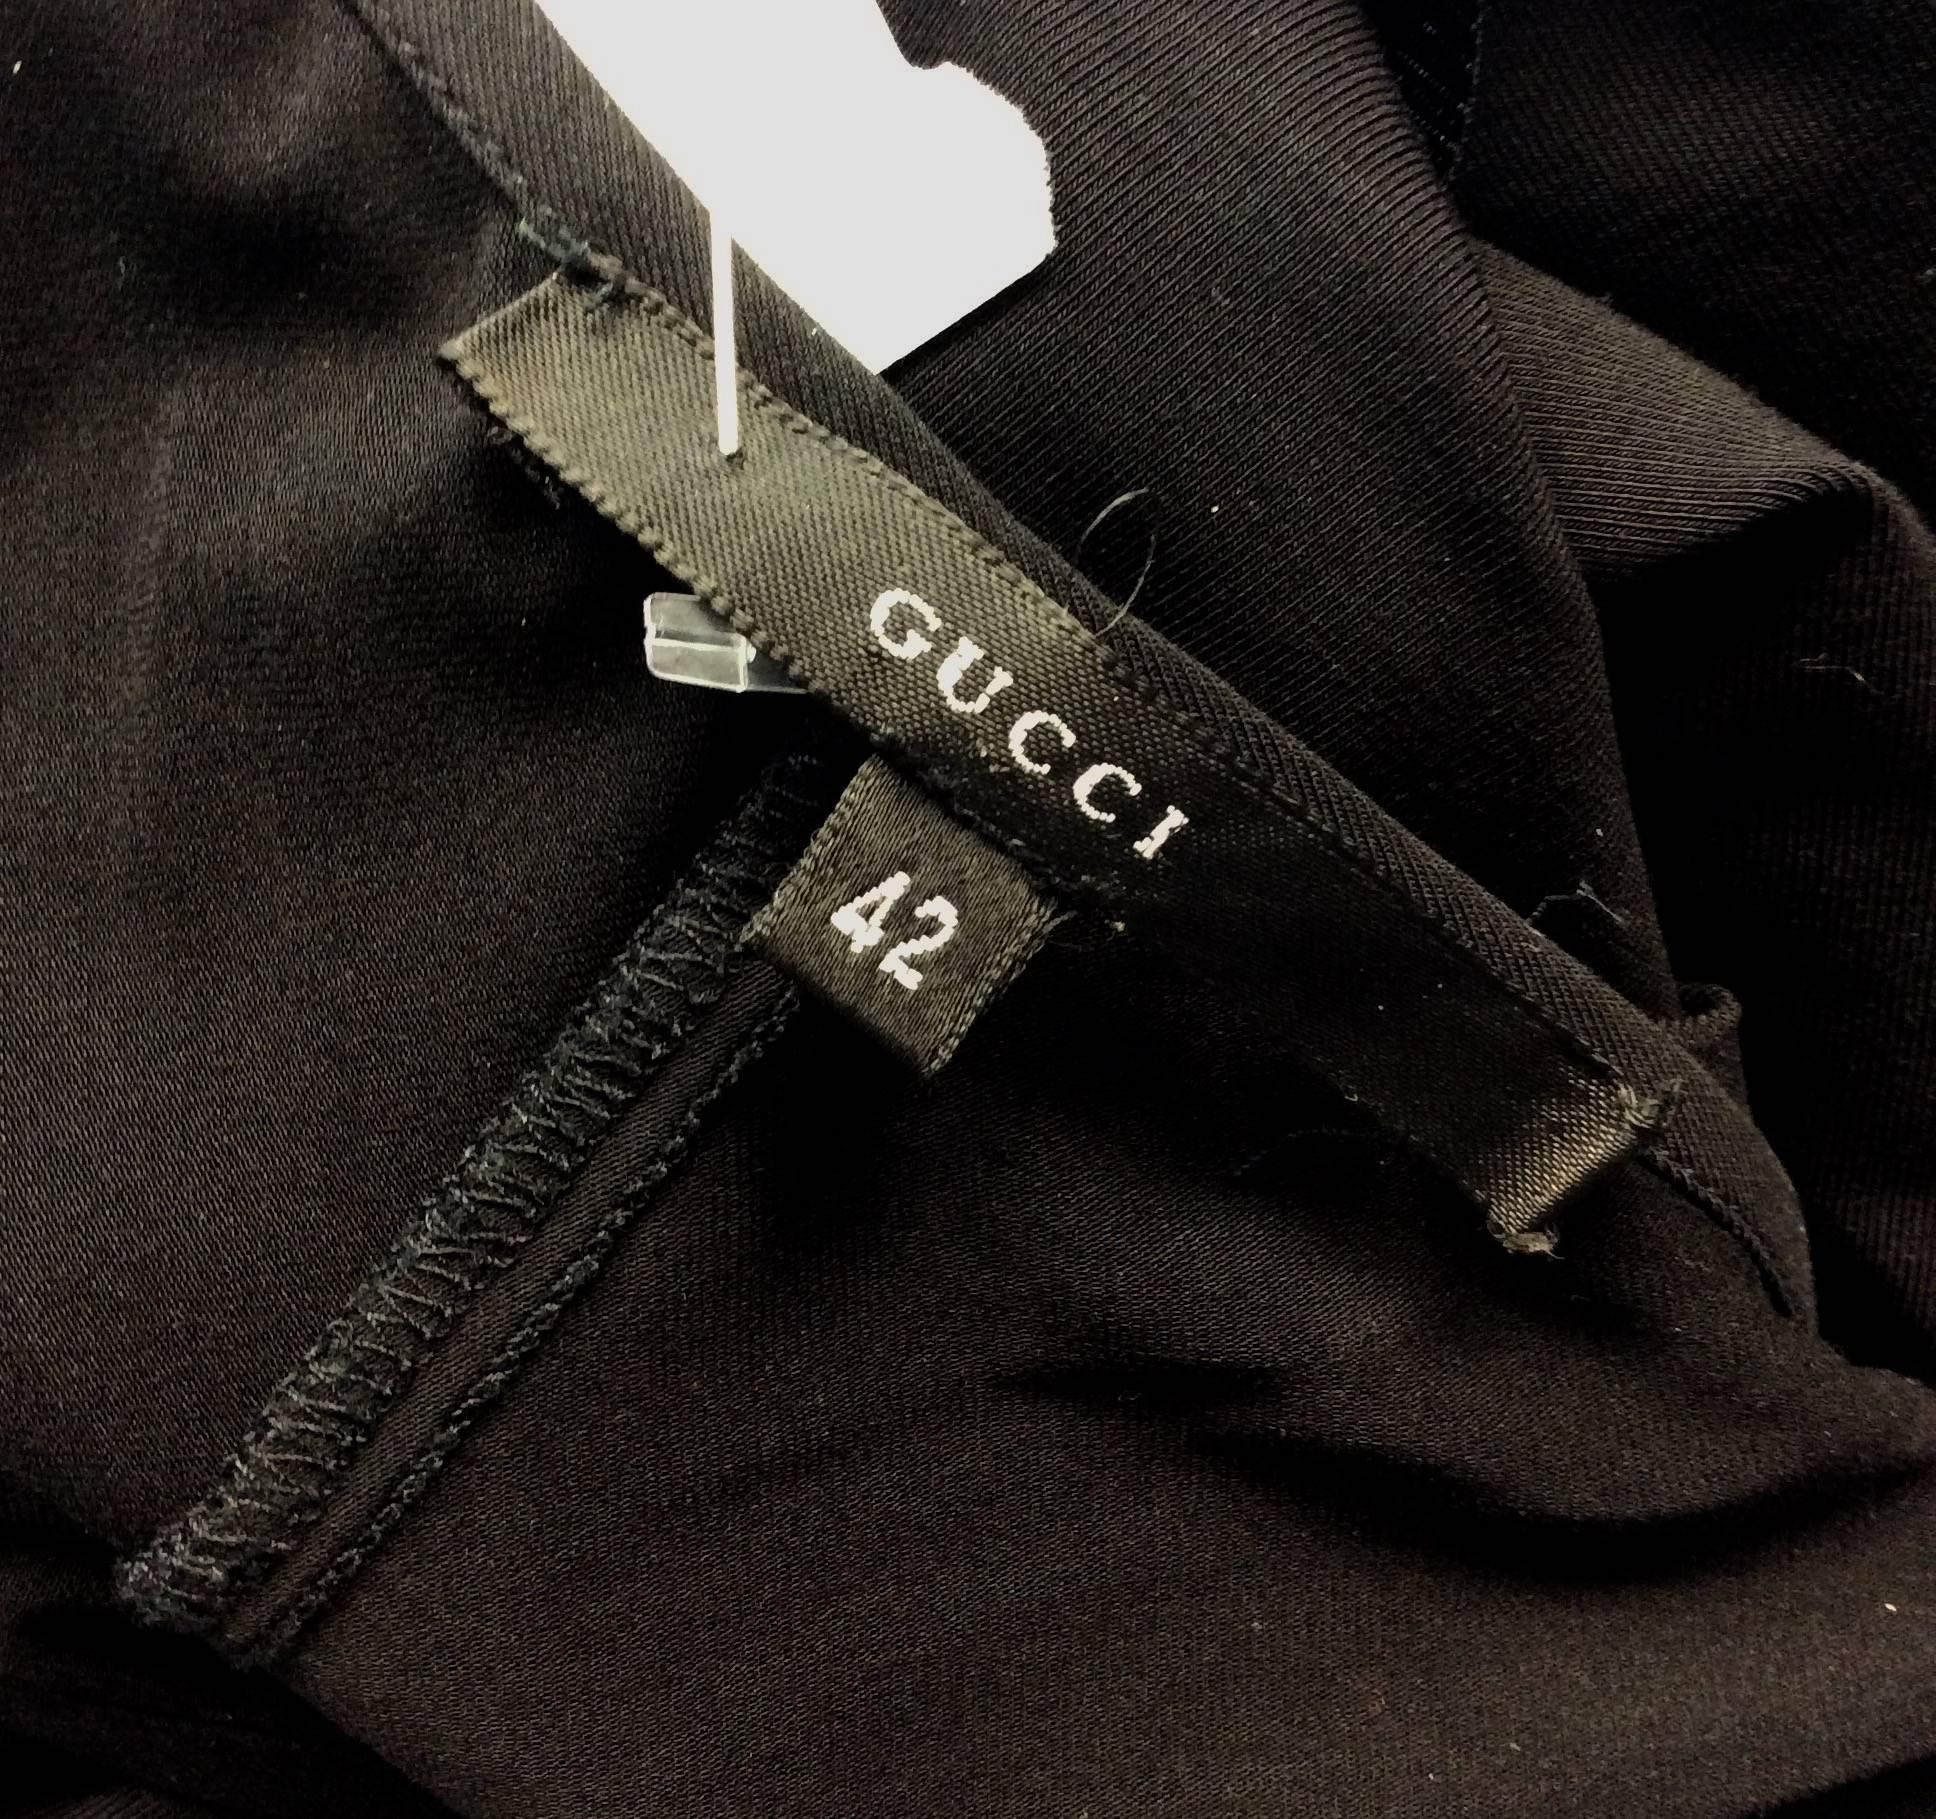 Gucci size 42 dress with lace trim and spaghetti strap
